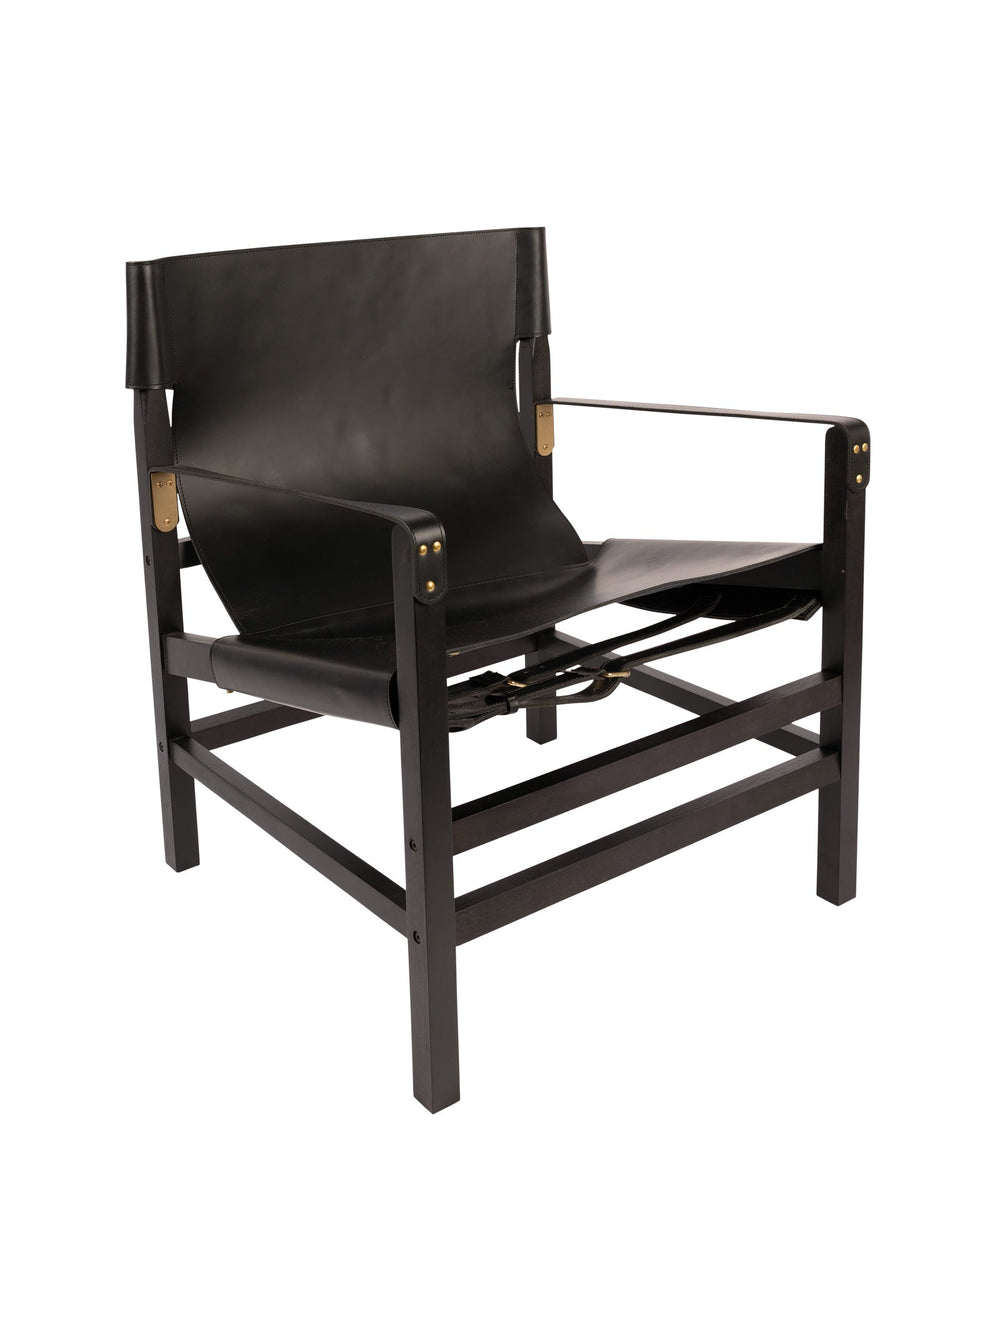 Colombo Occasional Chair - Hertex Haus Online - Furniture